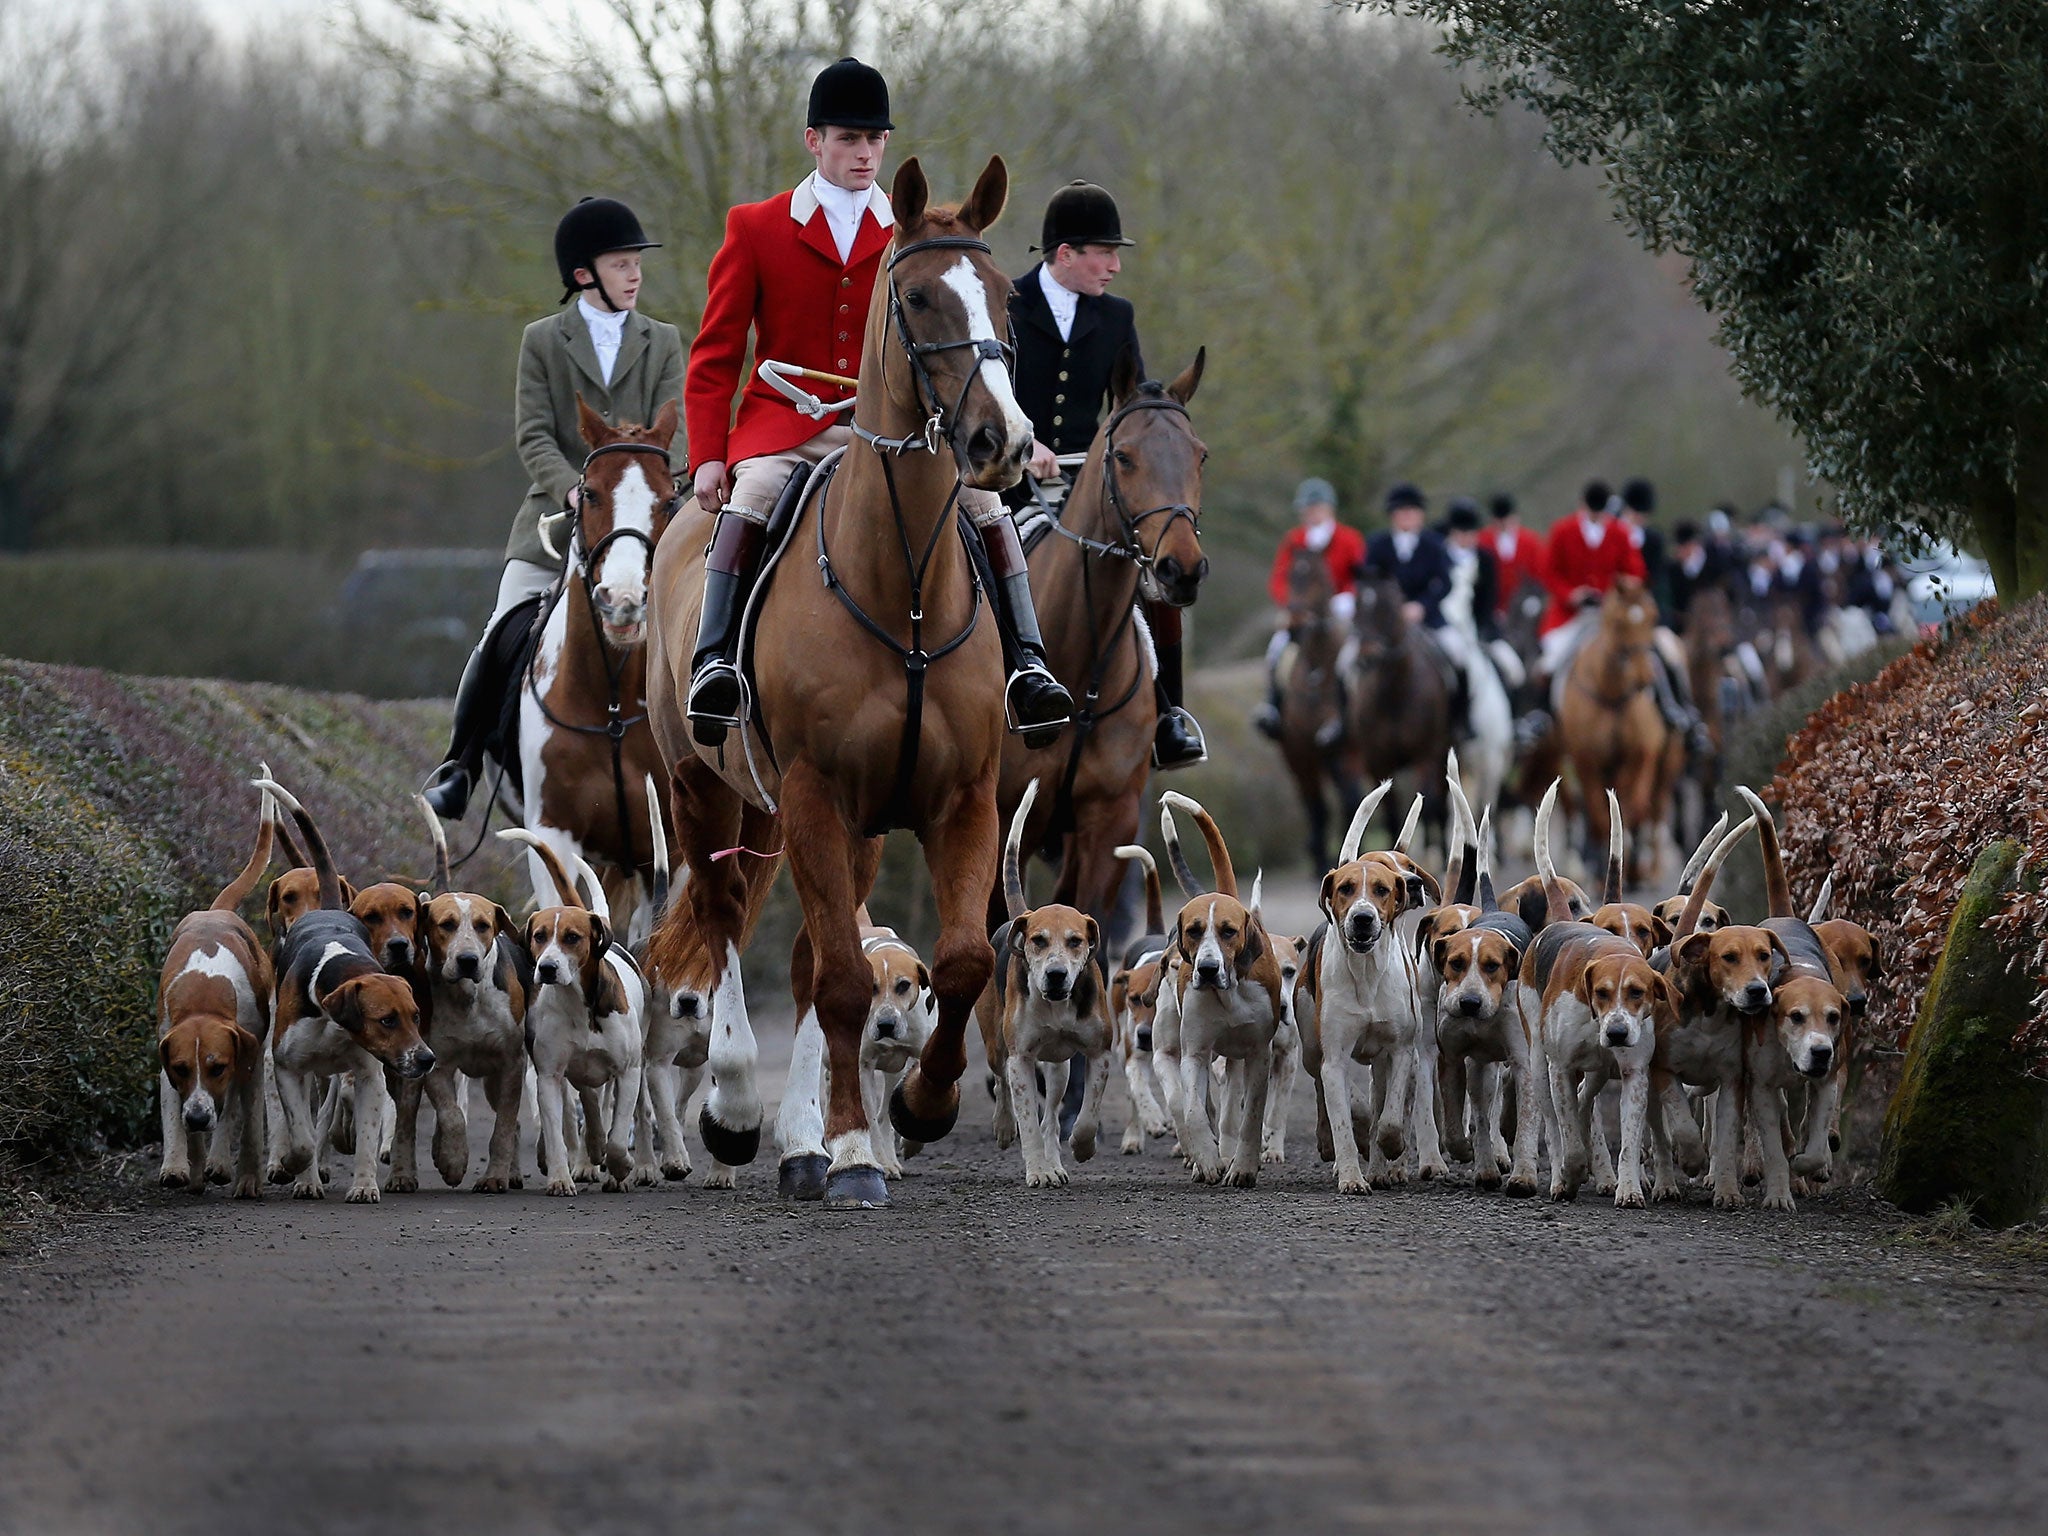 Pro-hunting campaigners have launched an intensive lobbying effort ahead of a crucial parliamentary vote to weaken the ban on the bloodsport